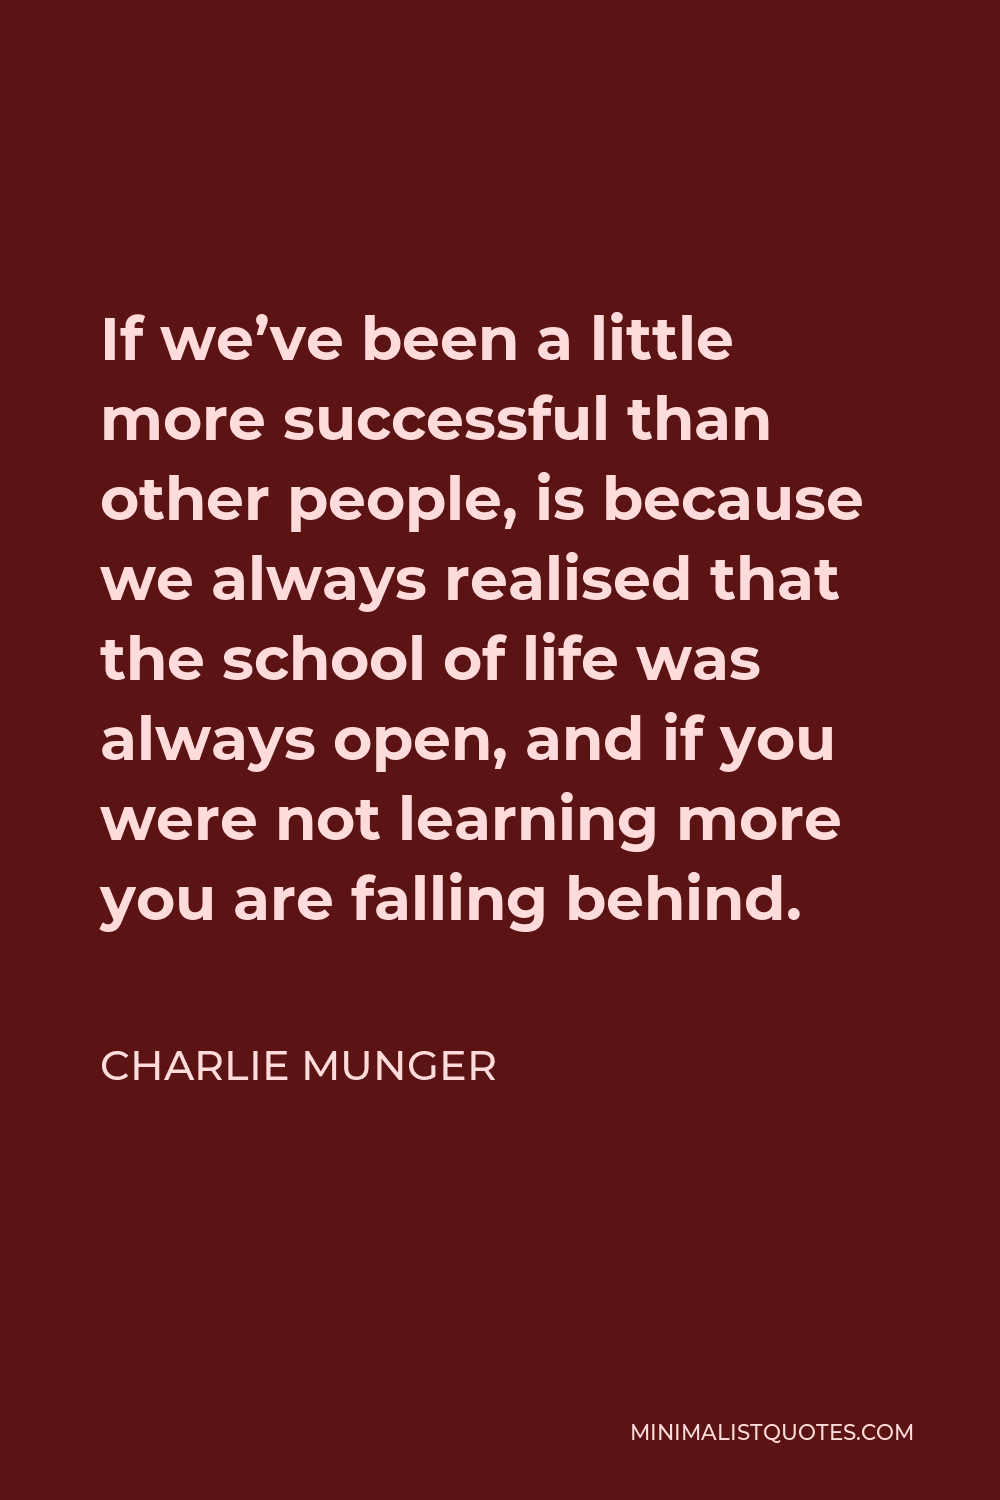 Charlie Munger Quote - If we’ve been a little more successful than other people, is because we always realised that the school of life was always open, and if you were not learning more you are falling behind.